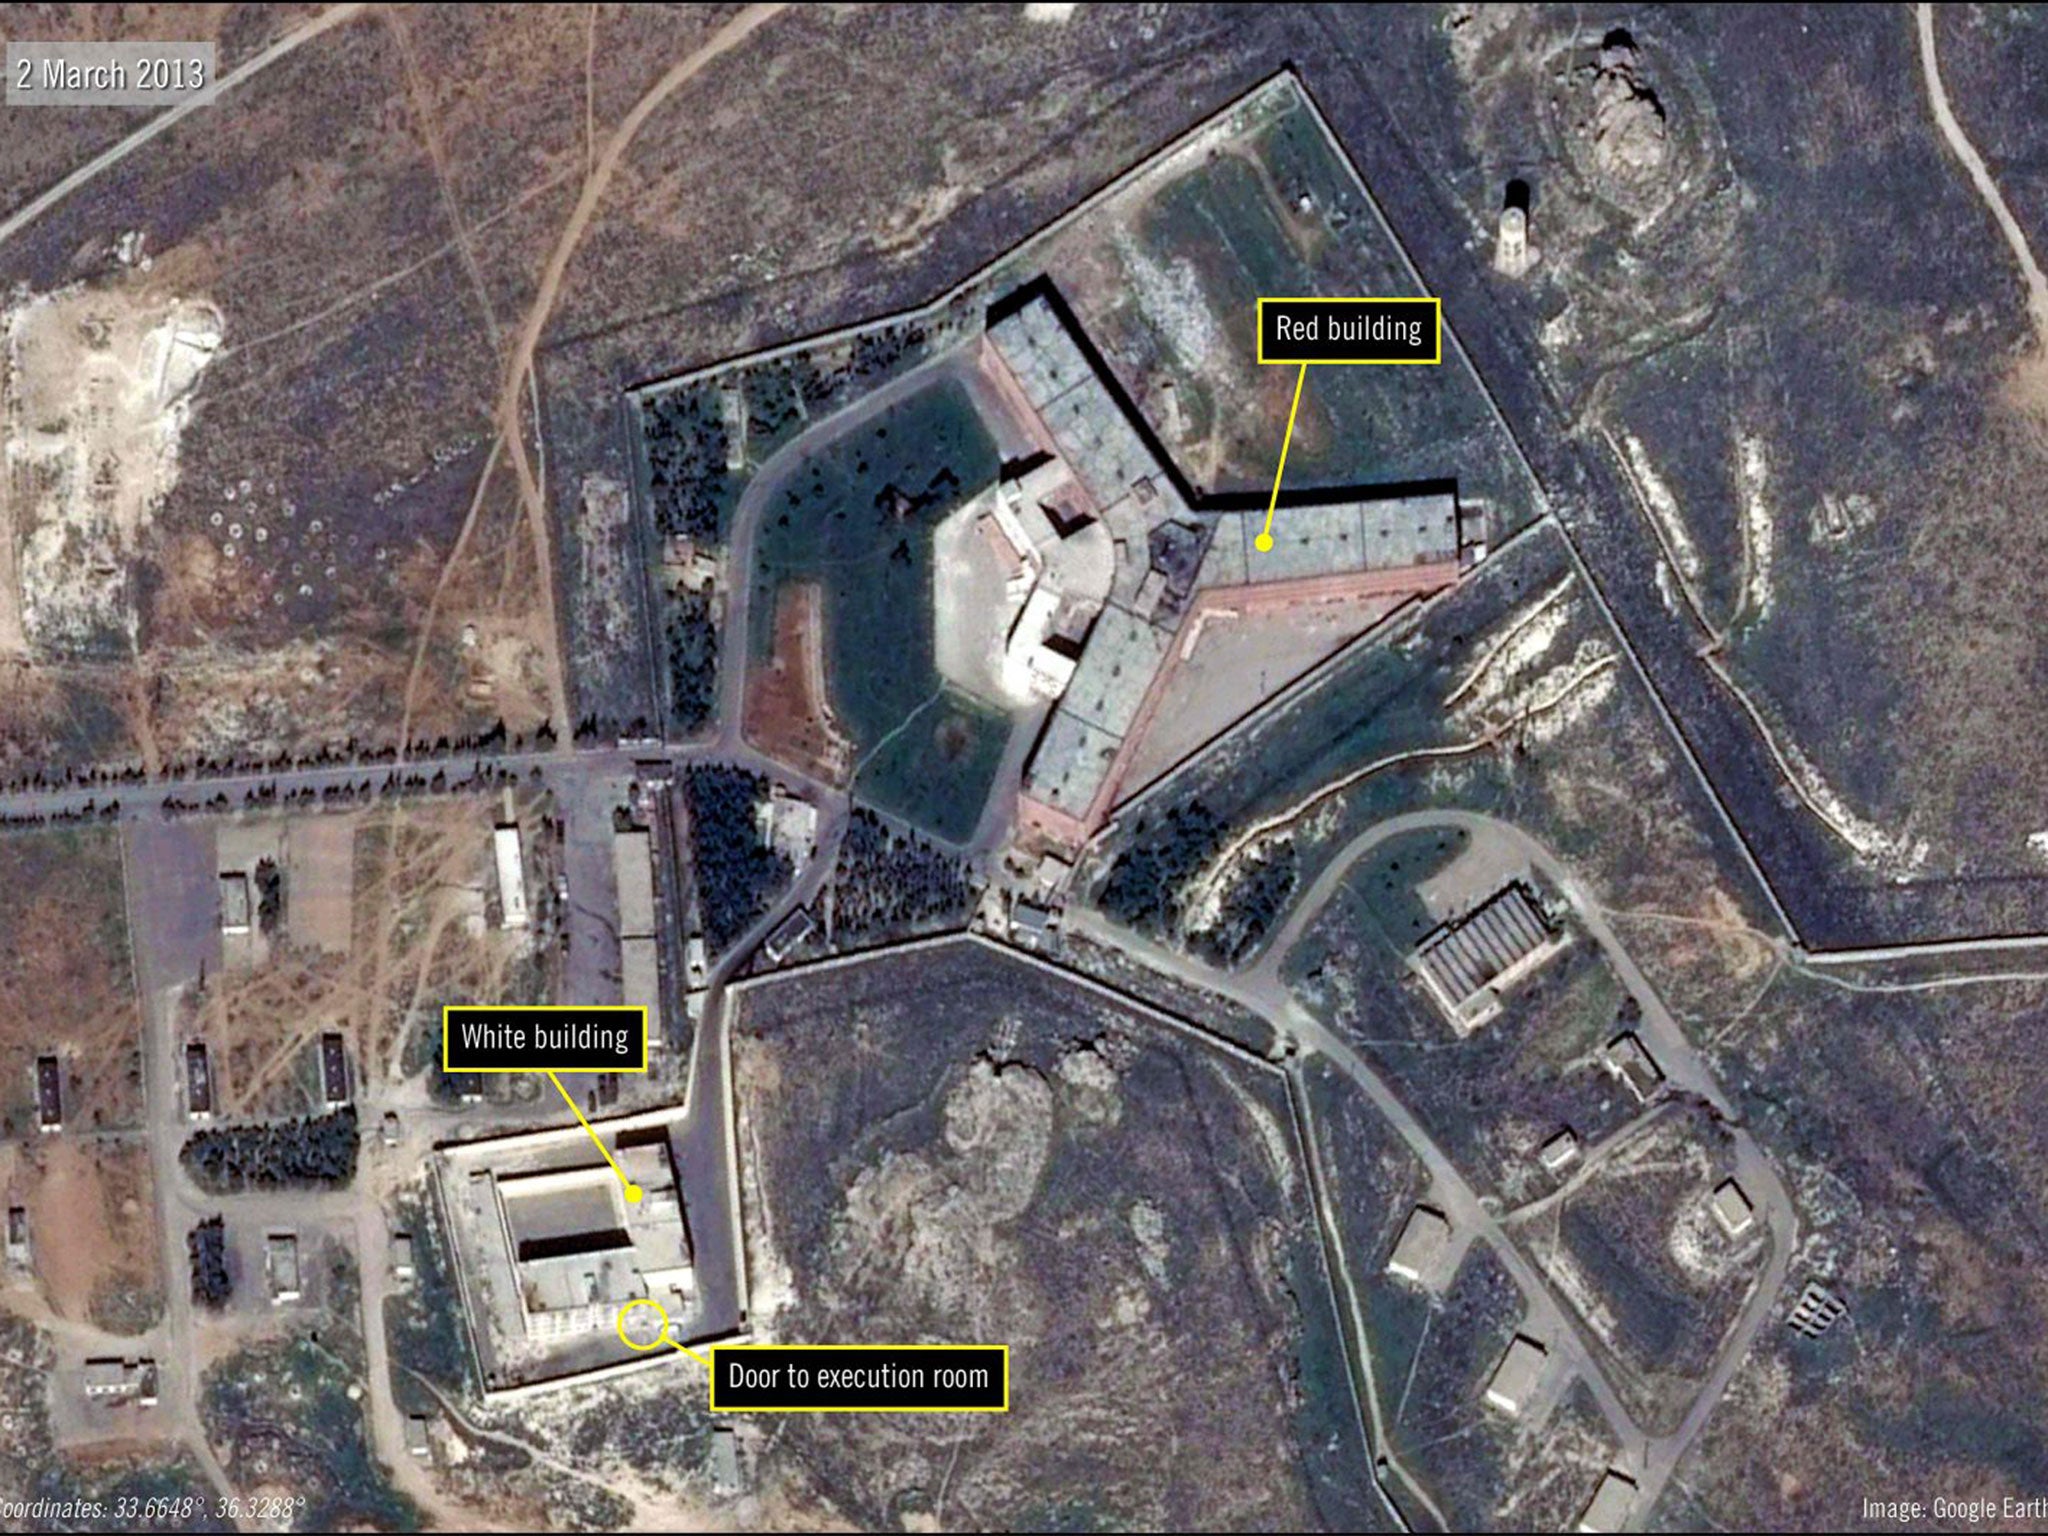 A satellite image of Saydnaya military prison, one of Syria's largest detention centres, located 18 miles north of Damascus.